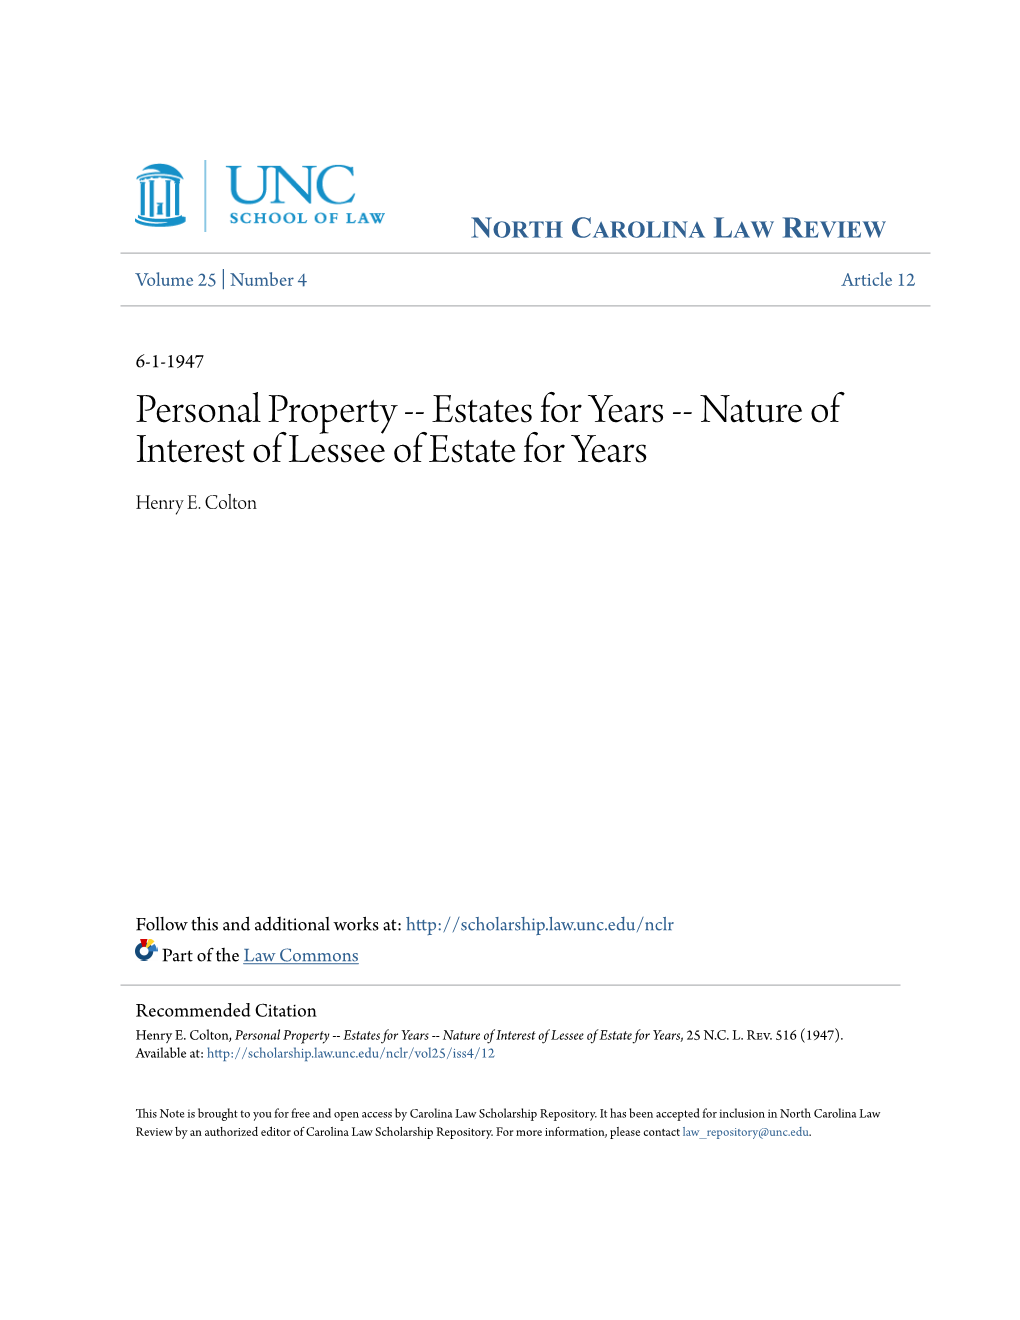 Personal Property -- Estates for Years -- Nature of Interest of Lessee of Estate for Years Henry E